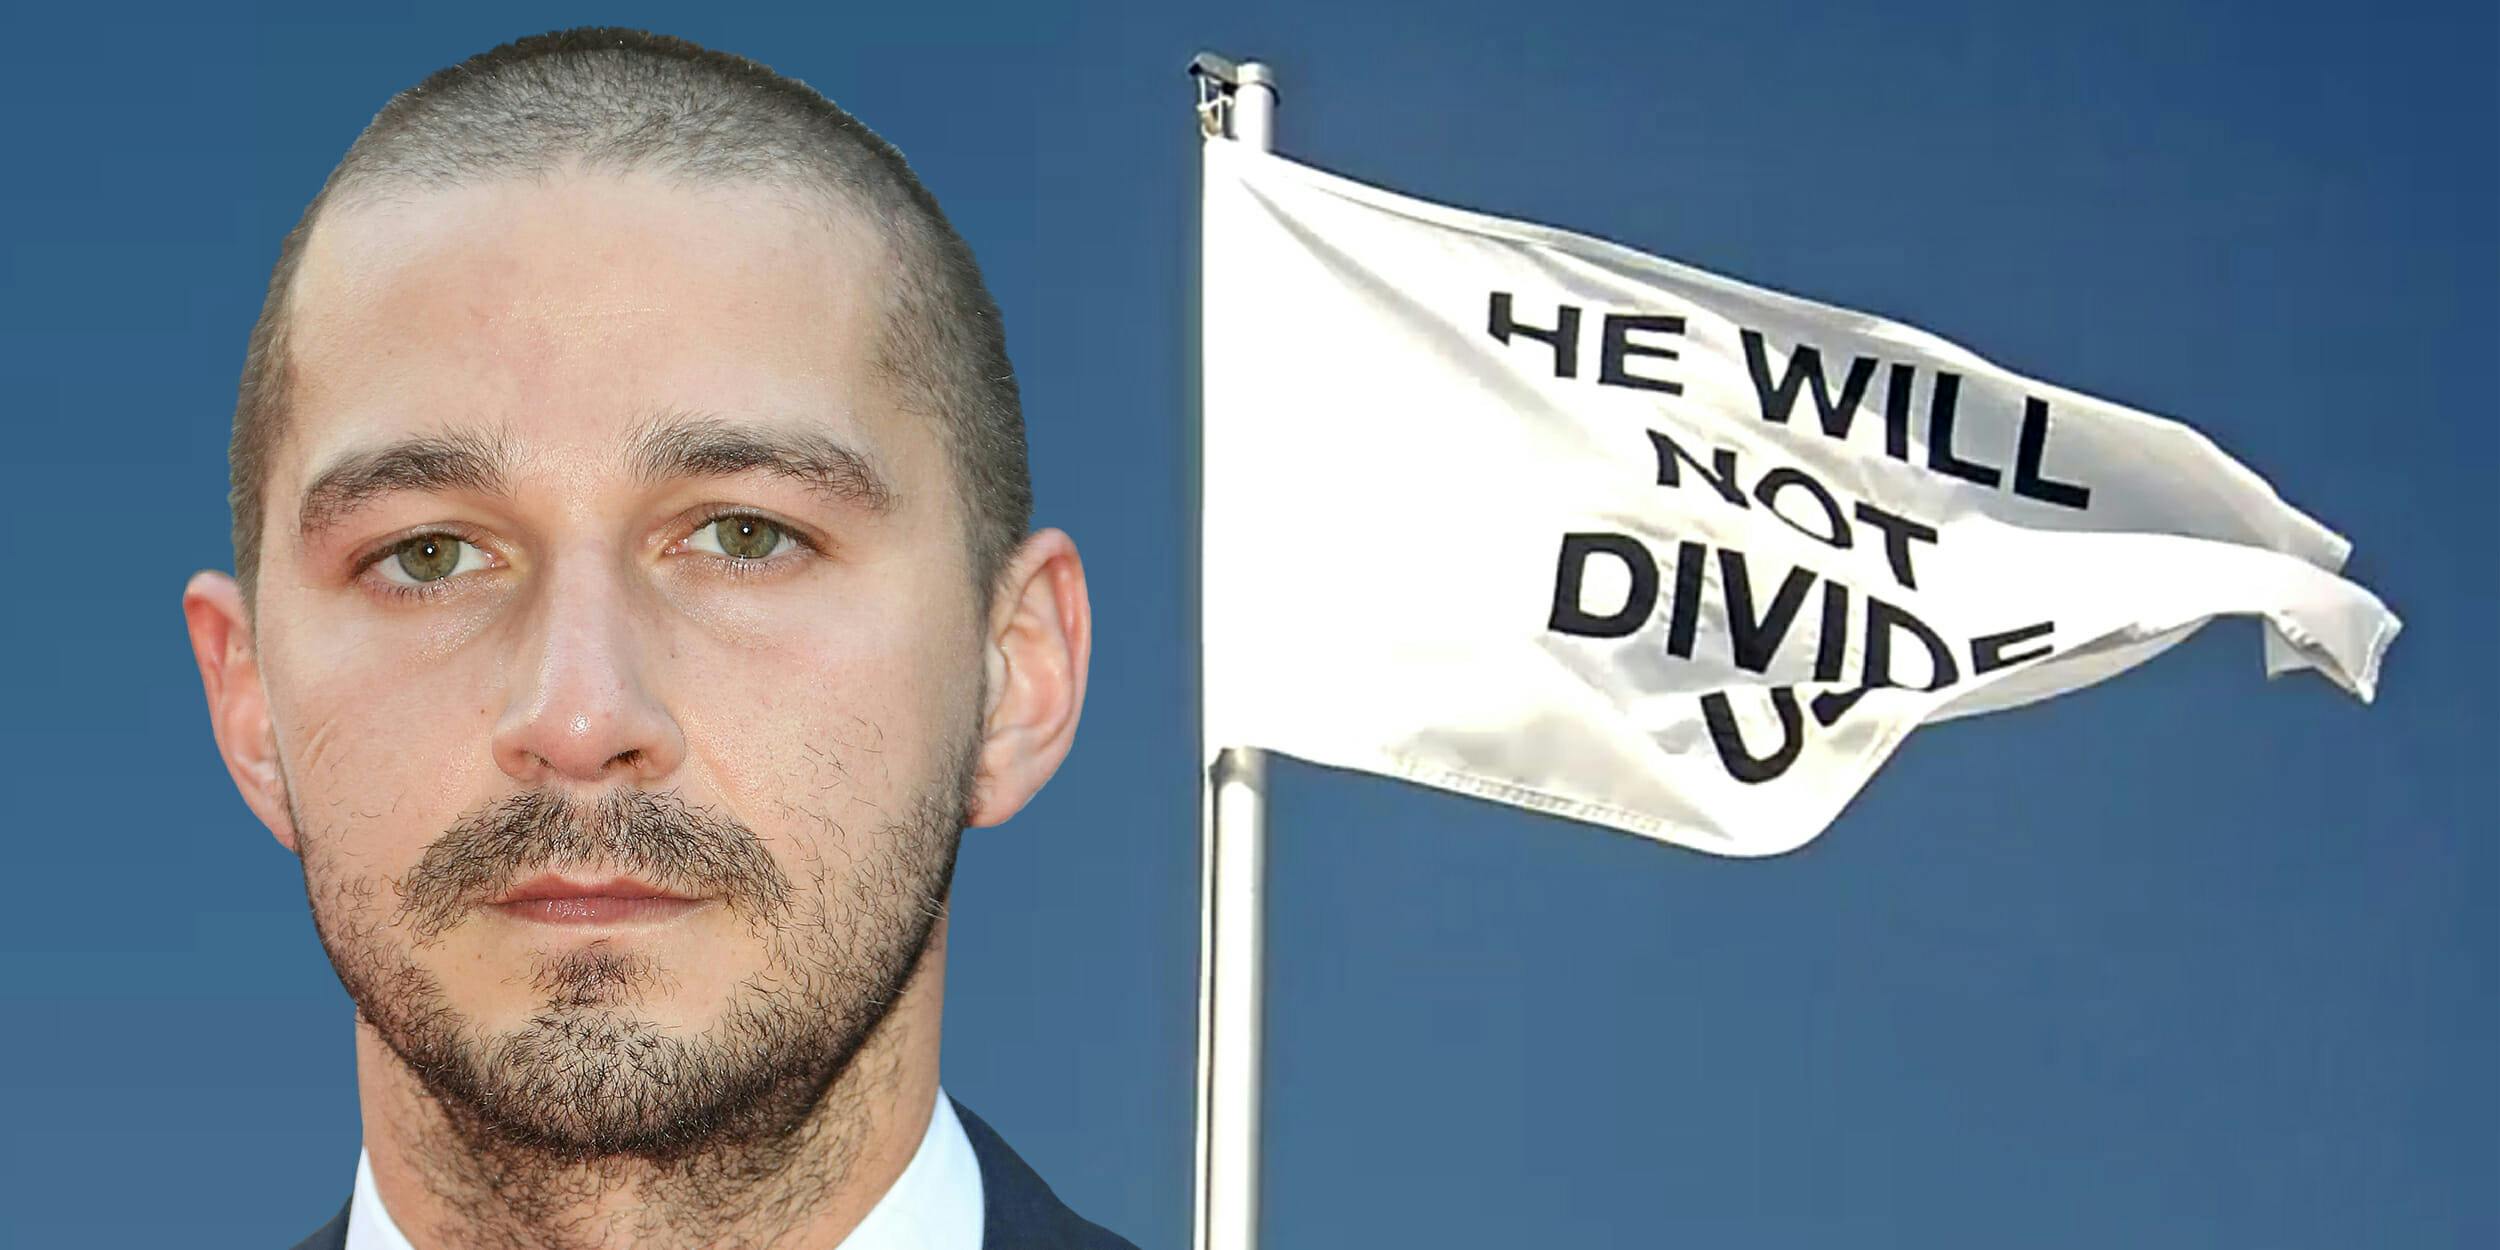 Shia LaBoeuf "He Will Not Divide Us" flag